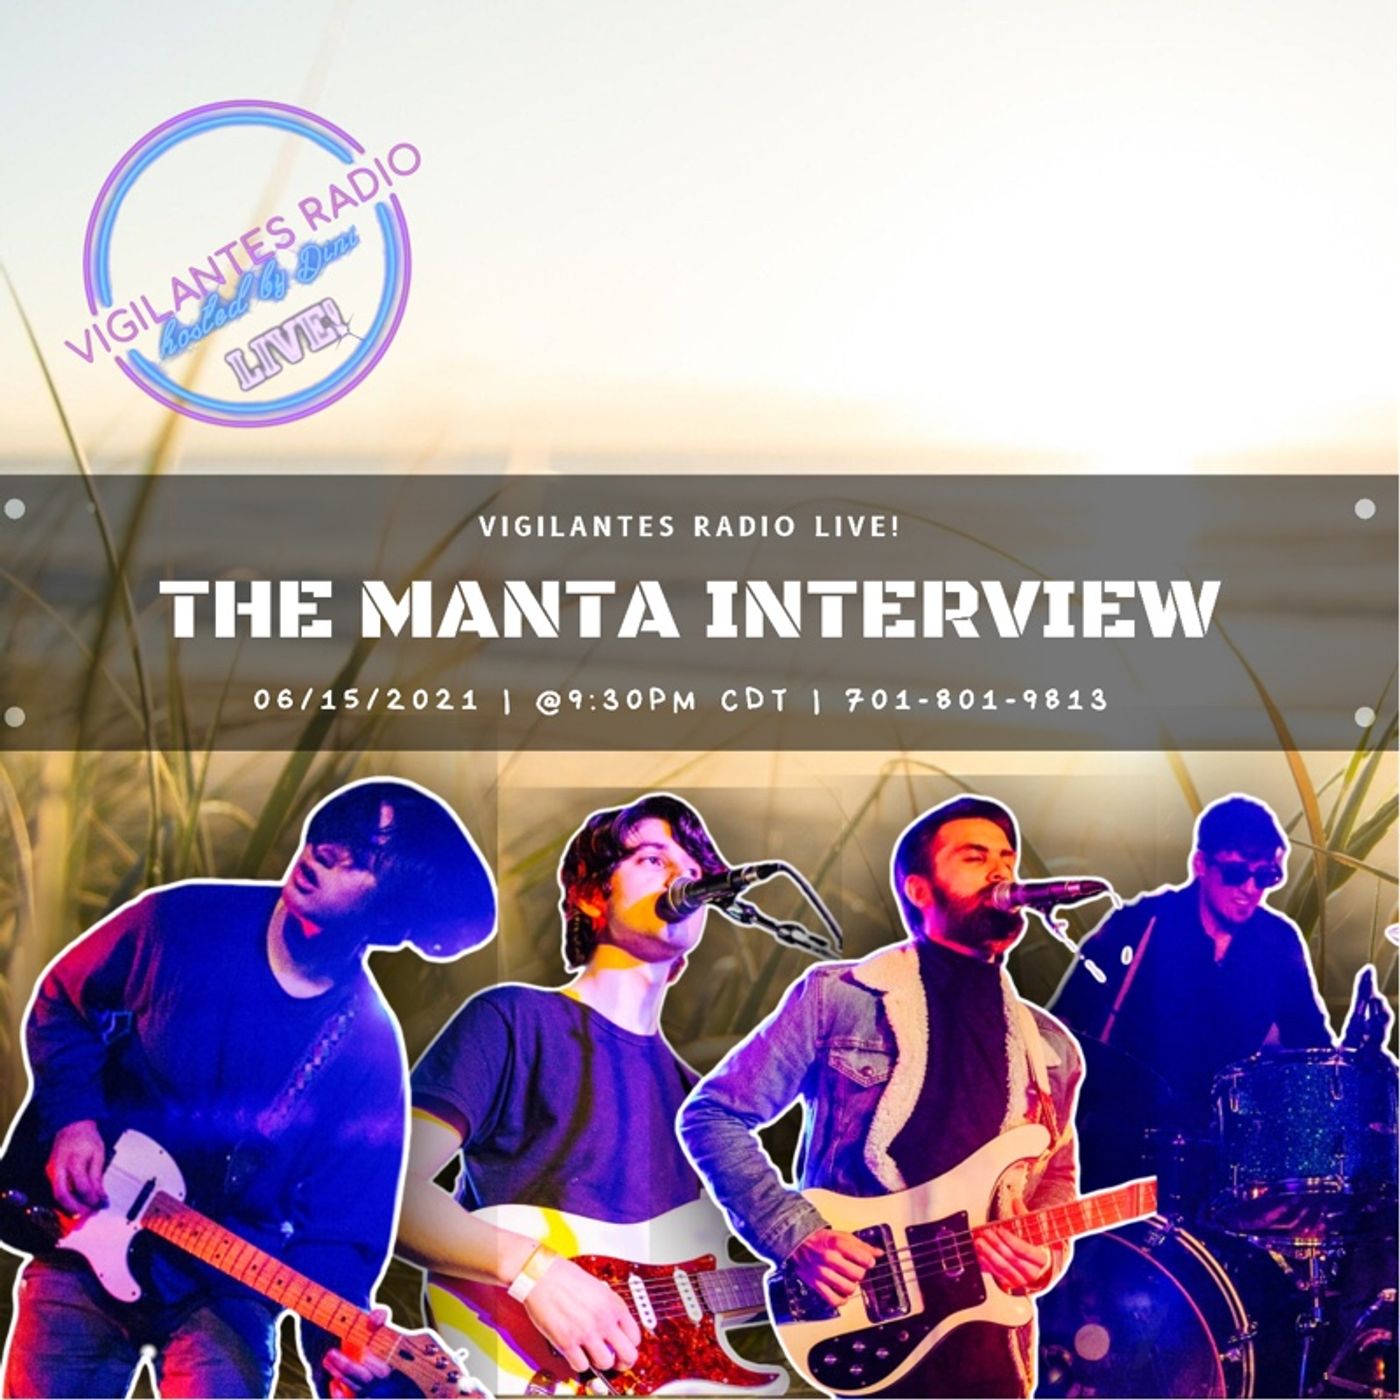 The Manta Interview. Image